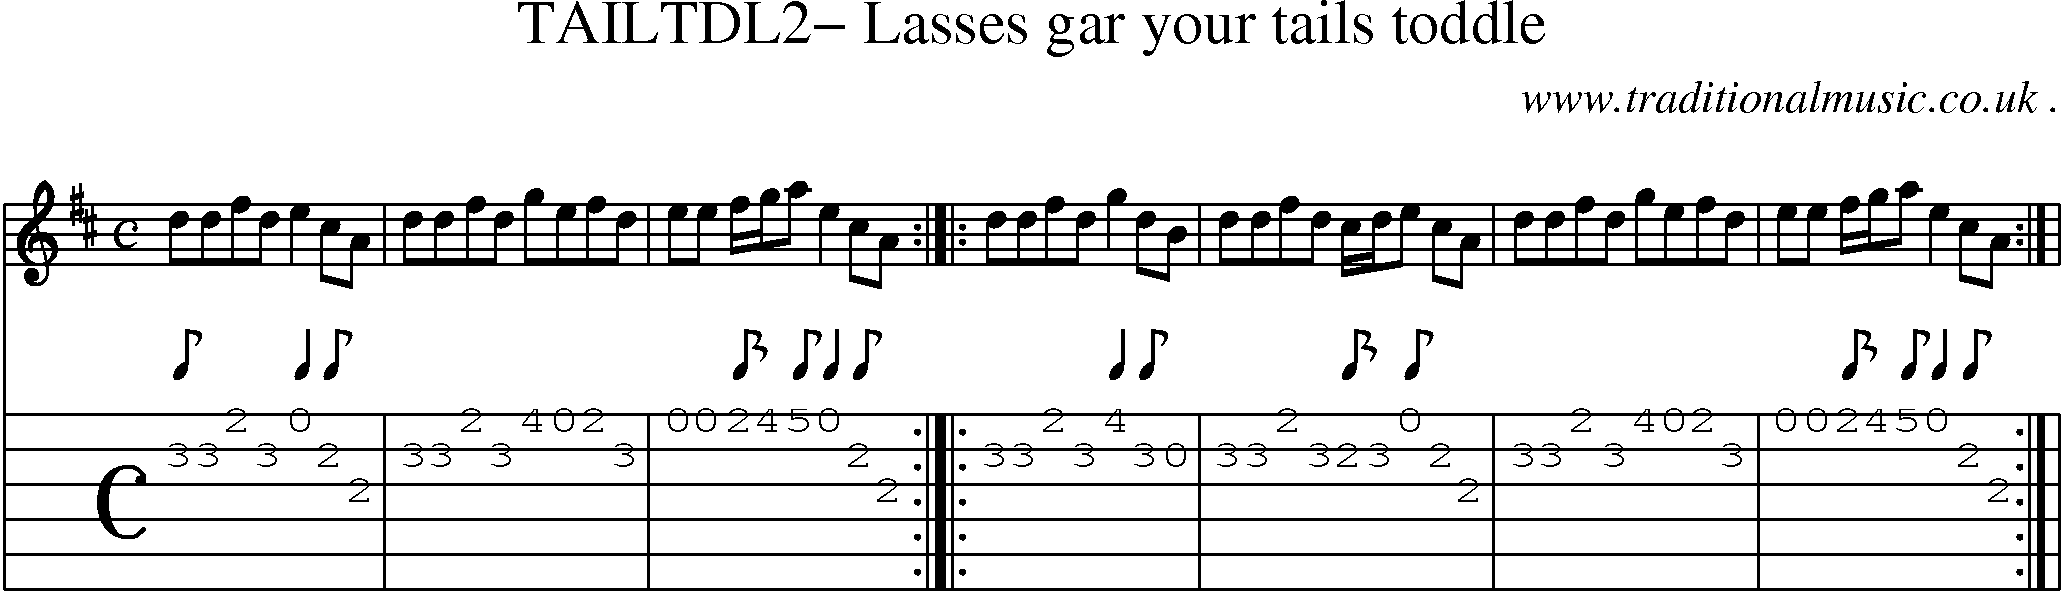 Sheet-Music and Guitar Tabs for Tailtdl2 Lasses Gar Your Tails Toddle